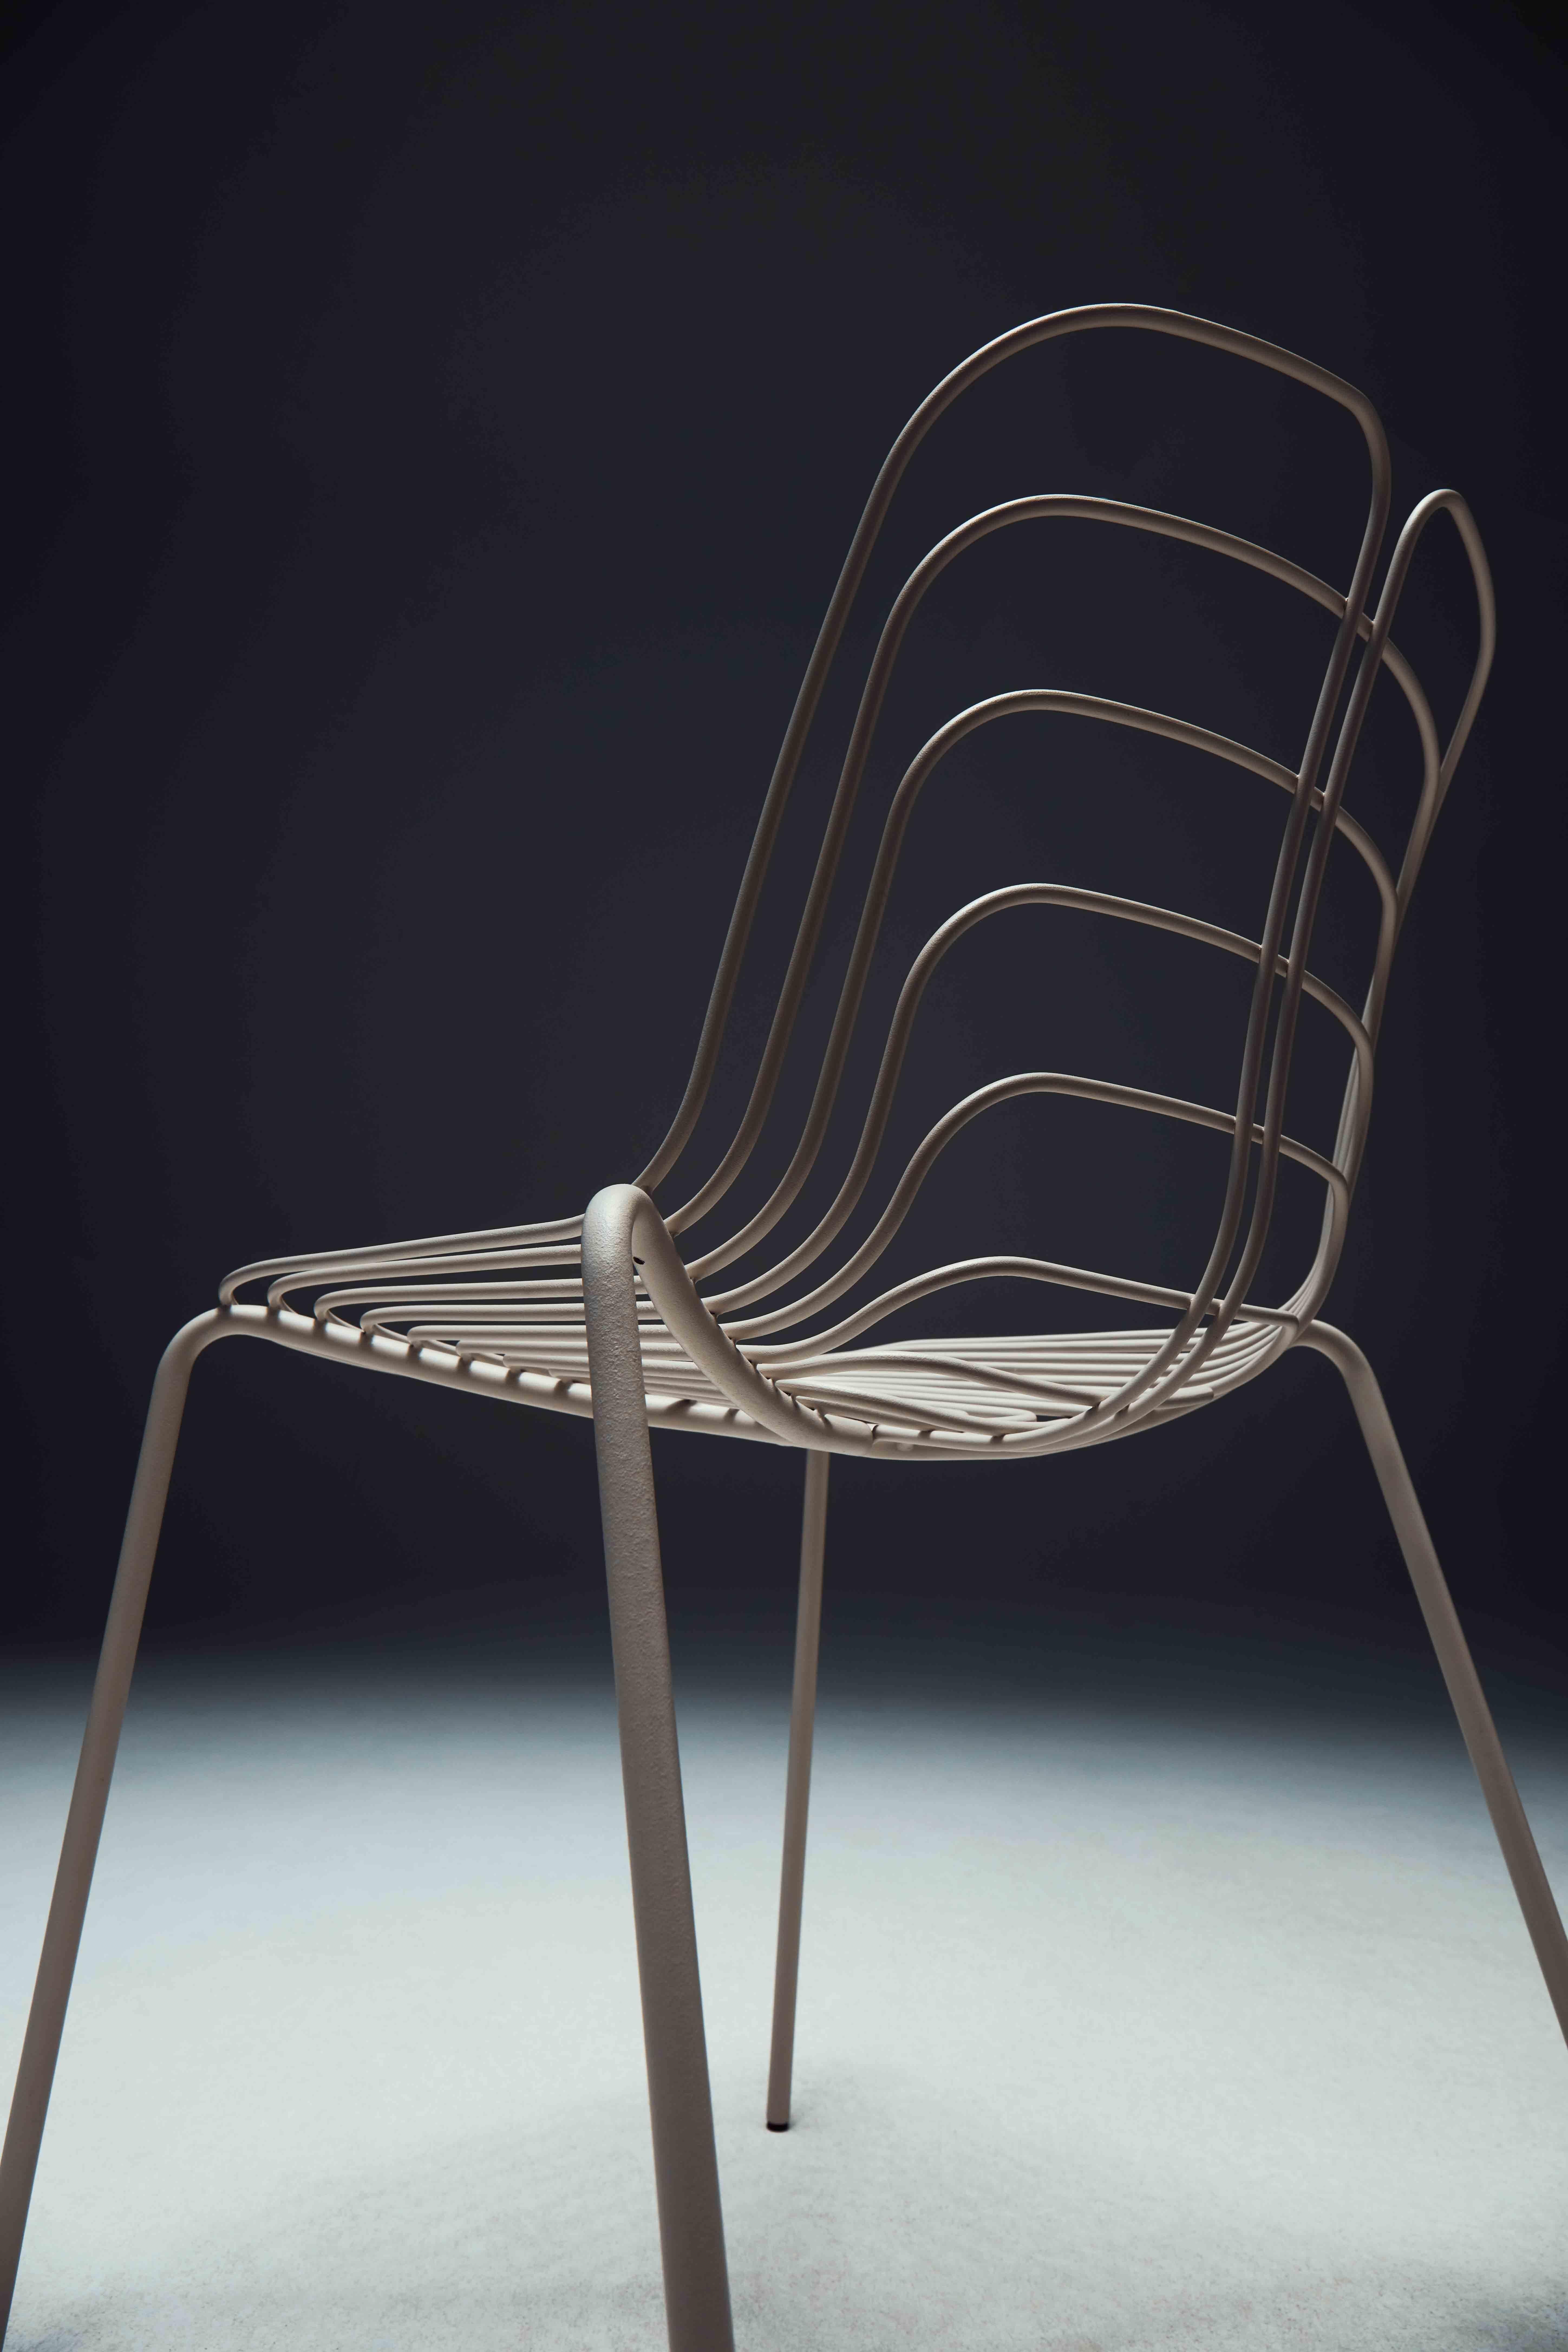 Contemporary Wired Outdoor Chair by Michael Young